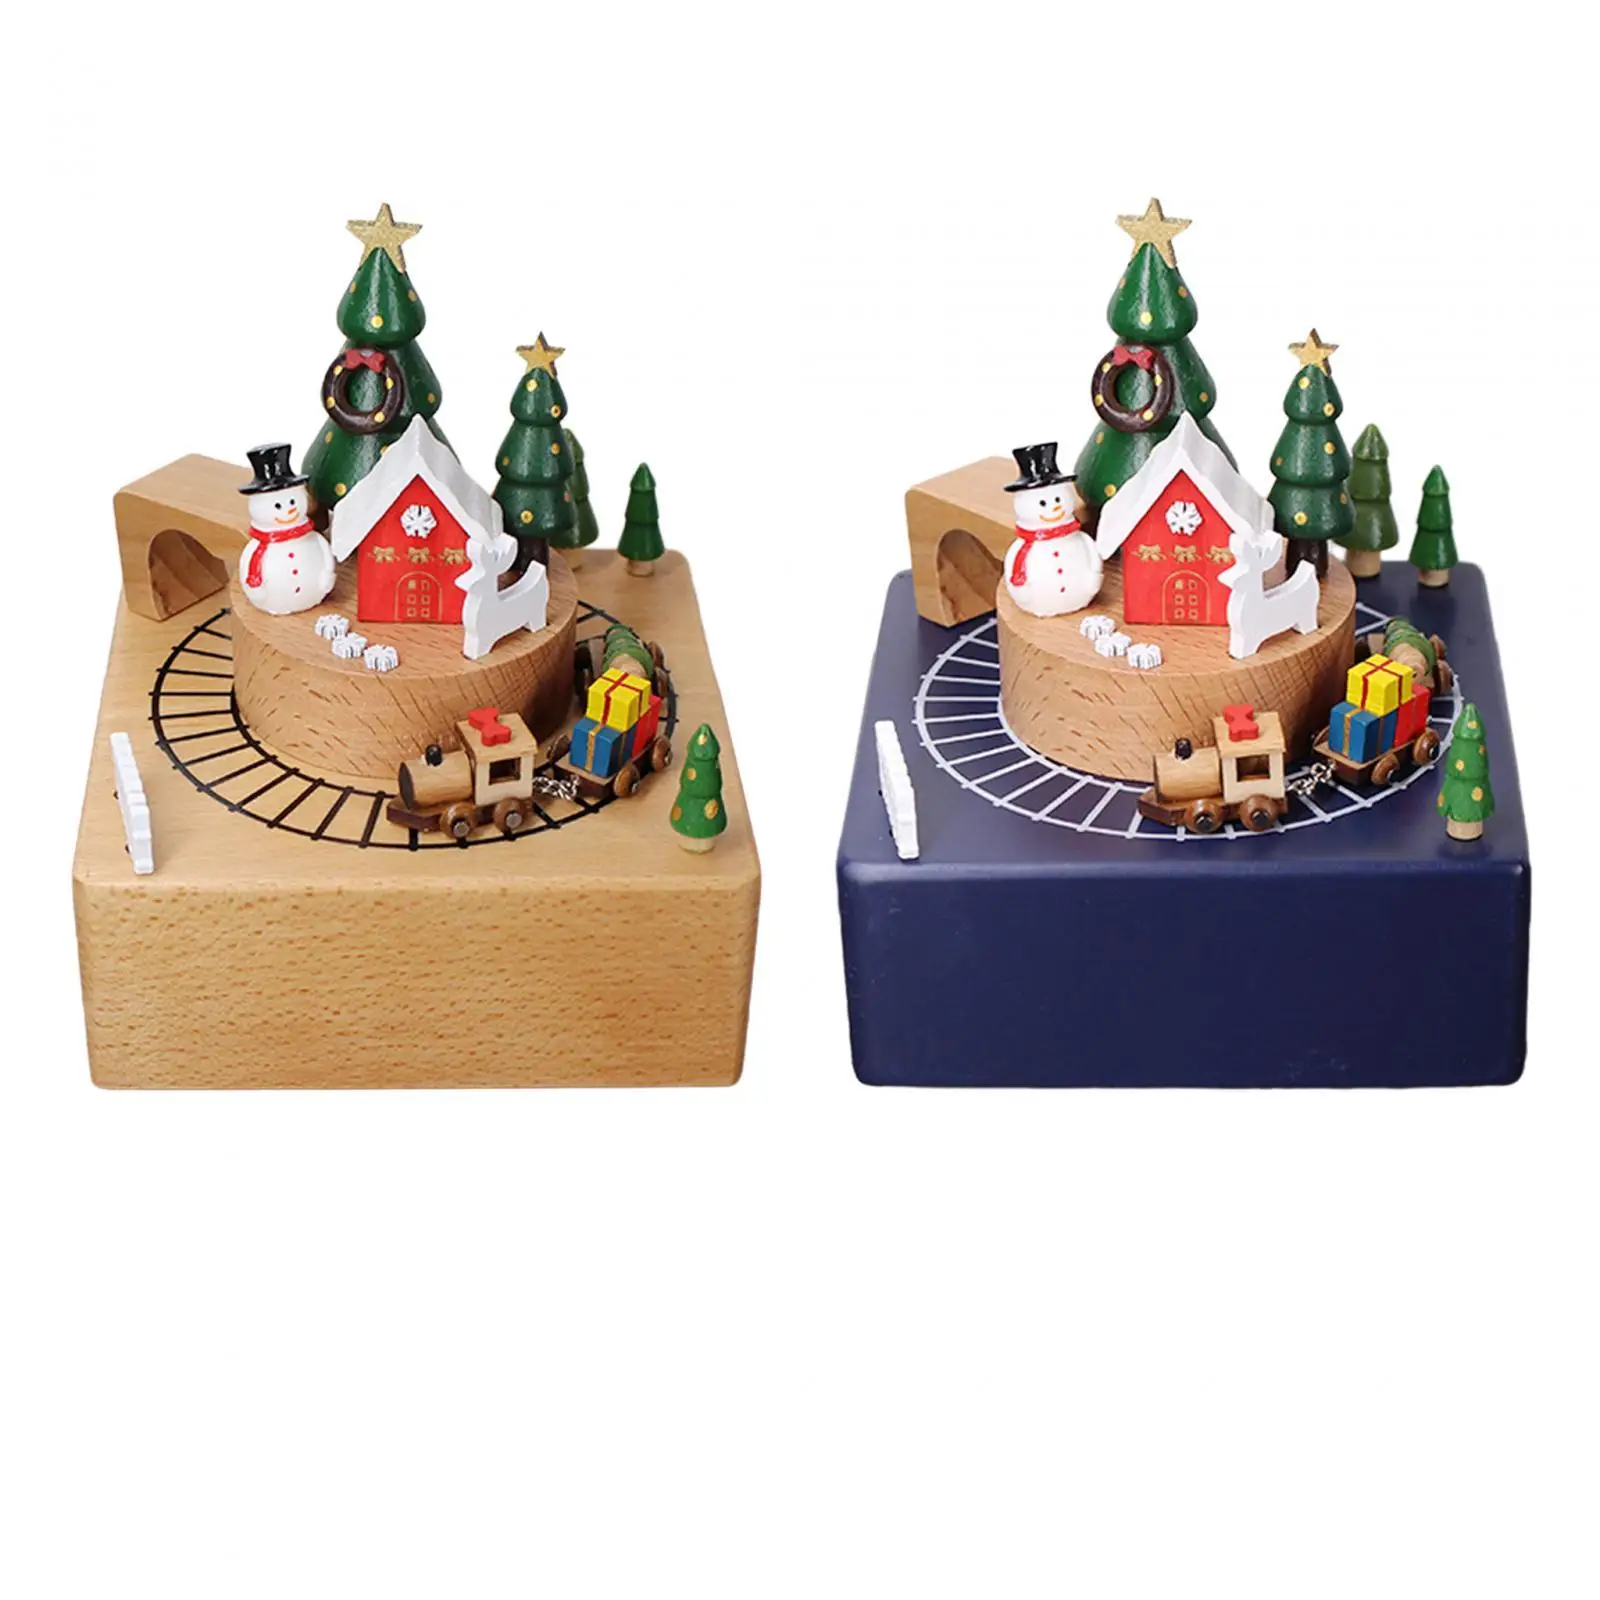 Christmas Wooden Musical Boxes Play Merry Christmas Song Clockwork Type with Revolving Train for Kids Girls Collectible Gift